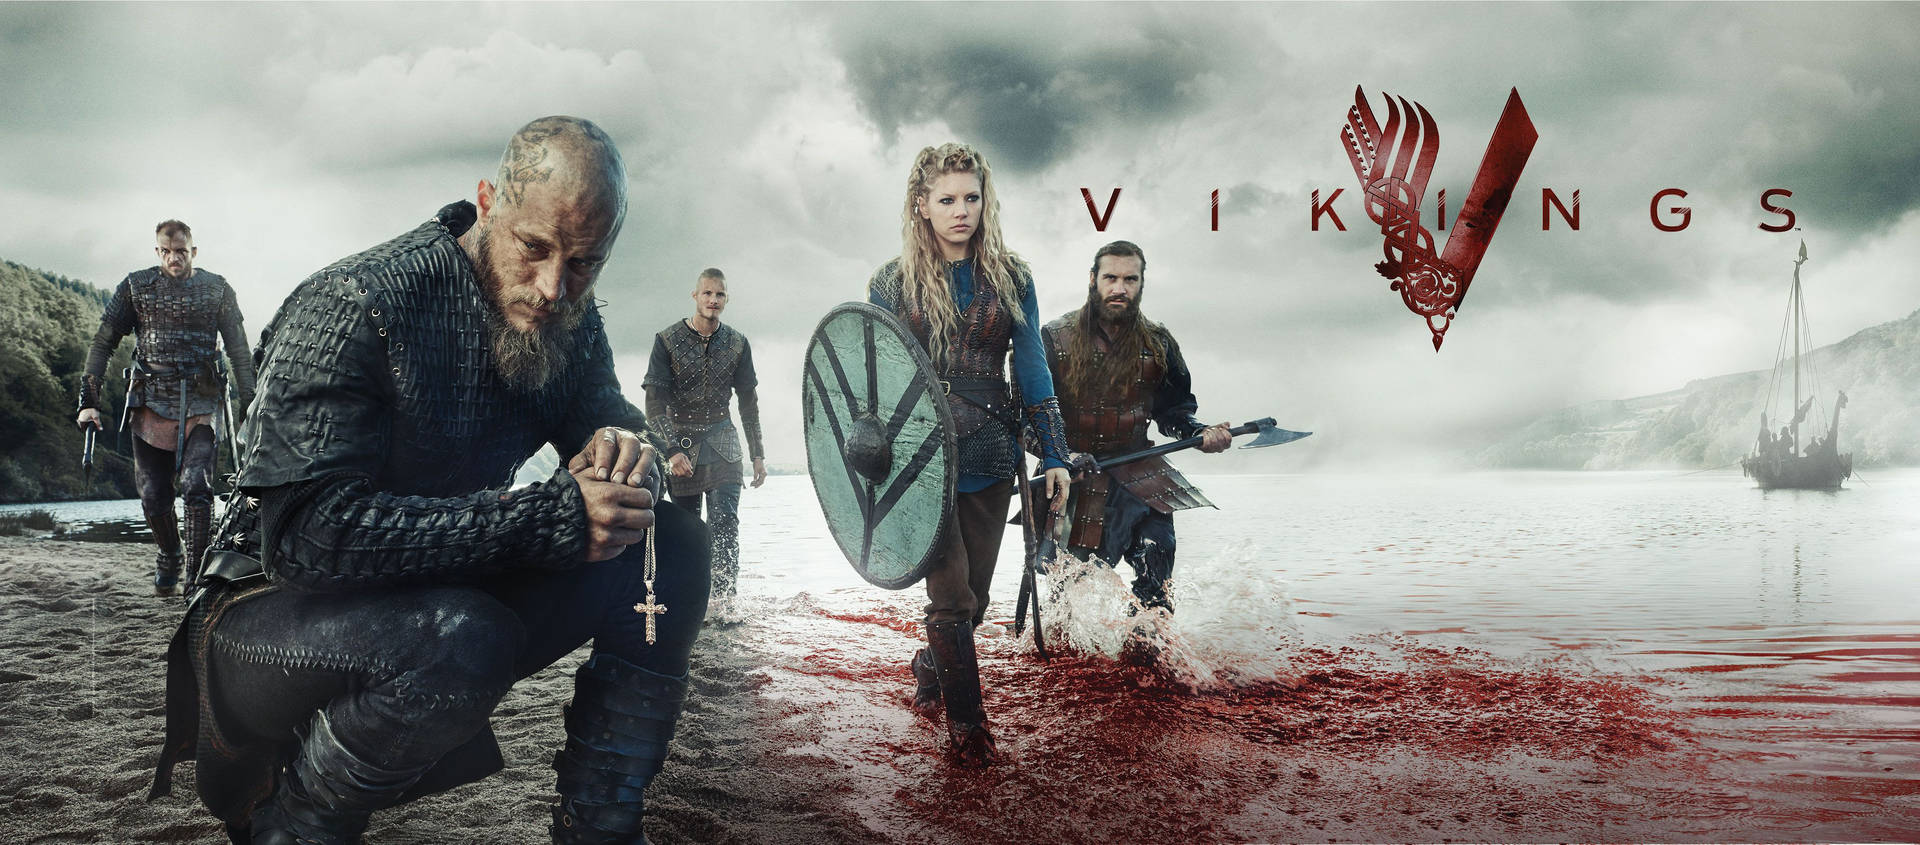 Vikings Characters On Show Poster Background